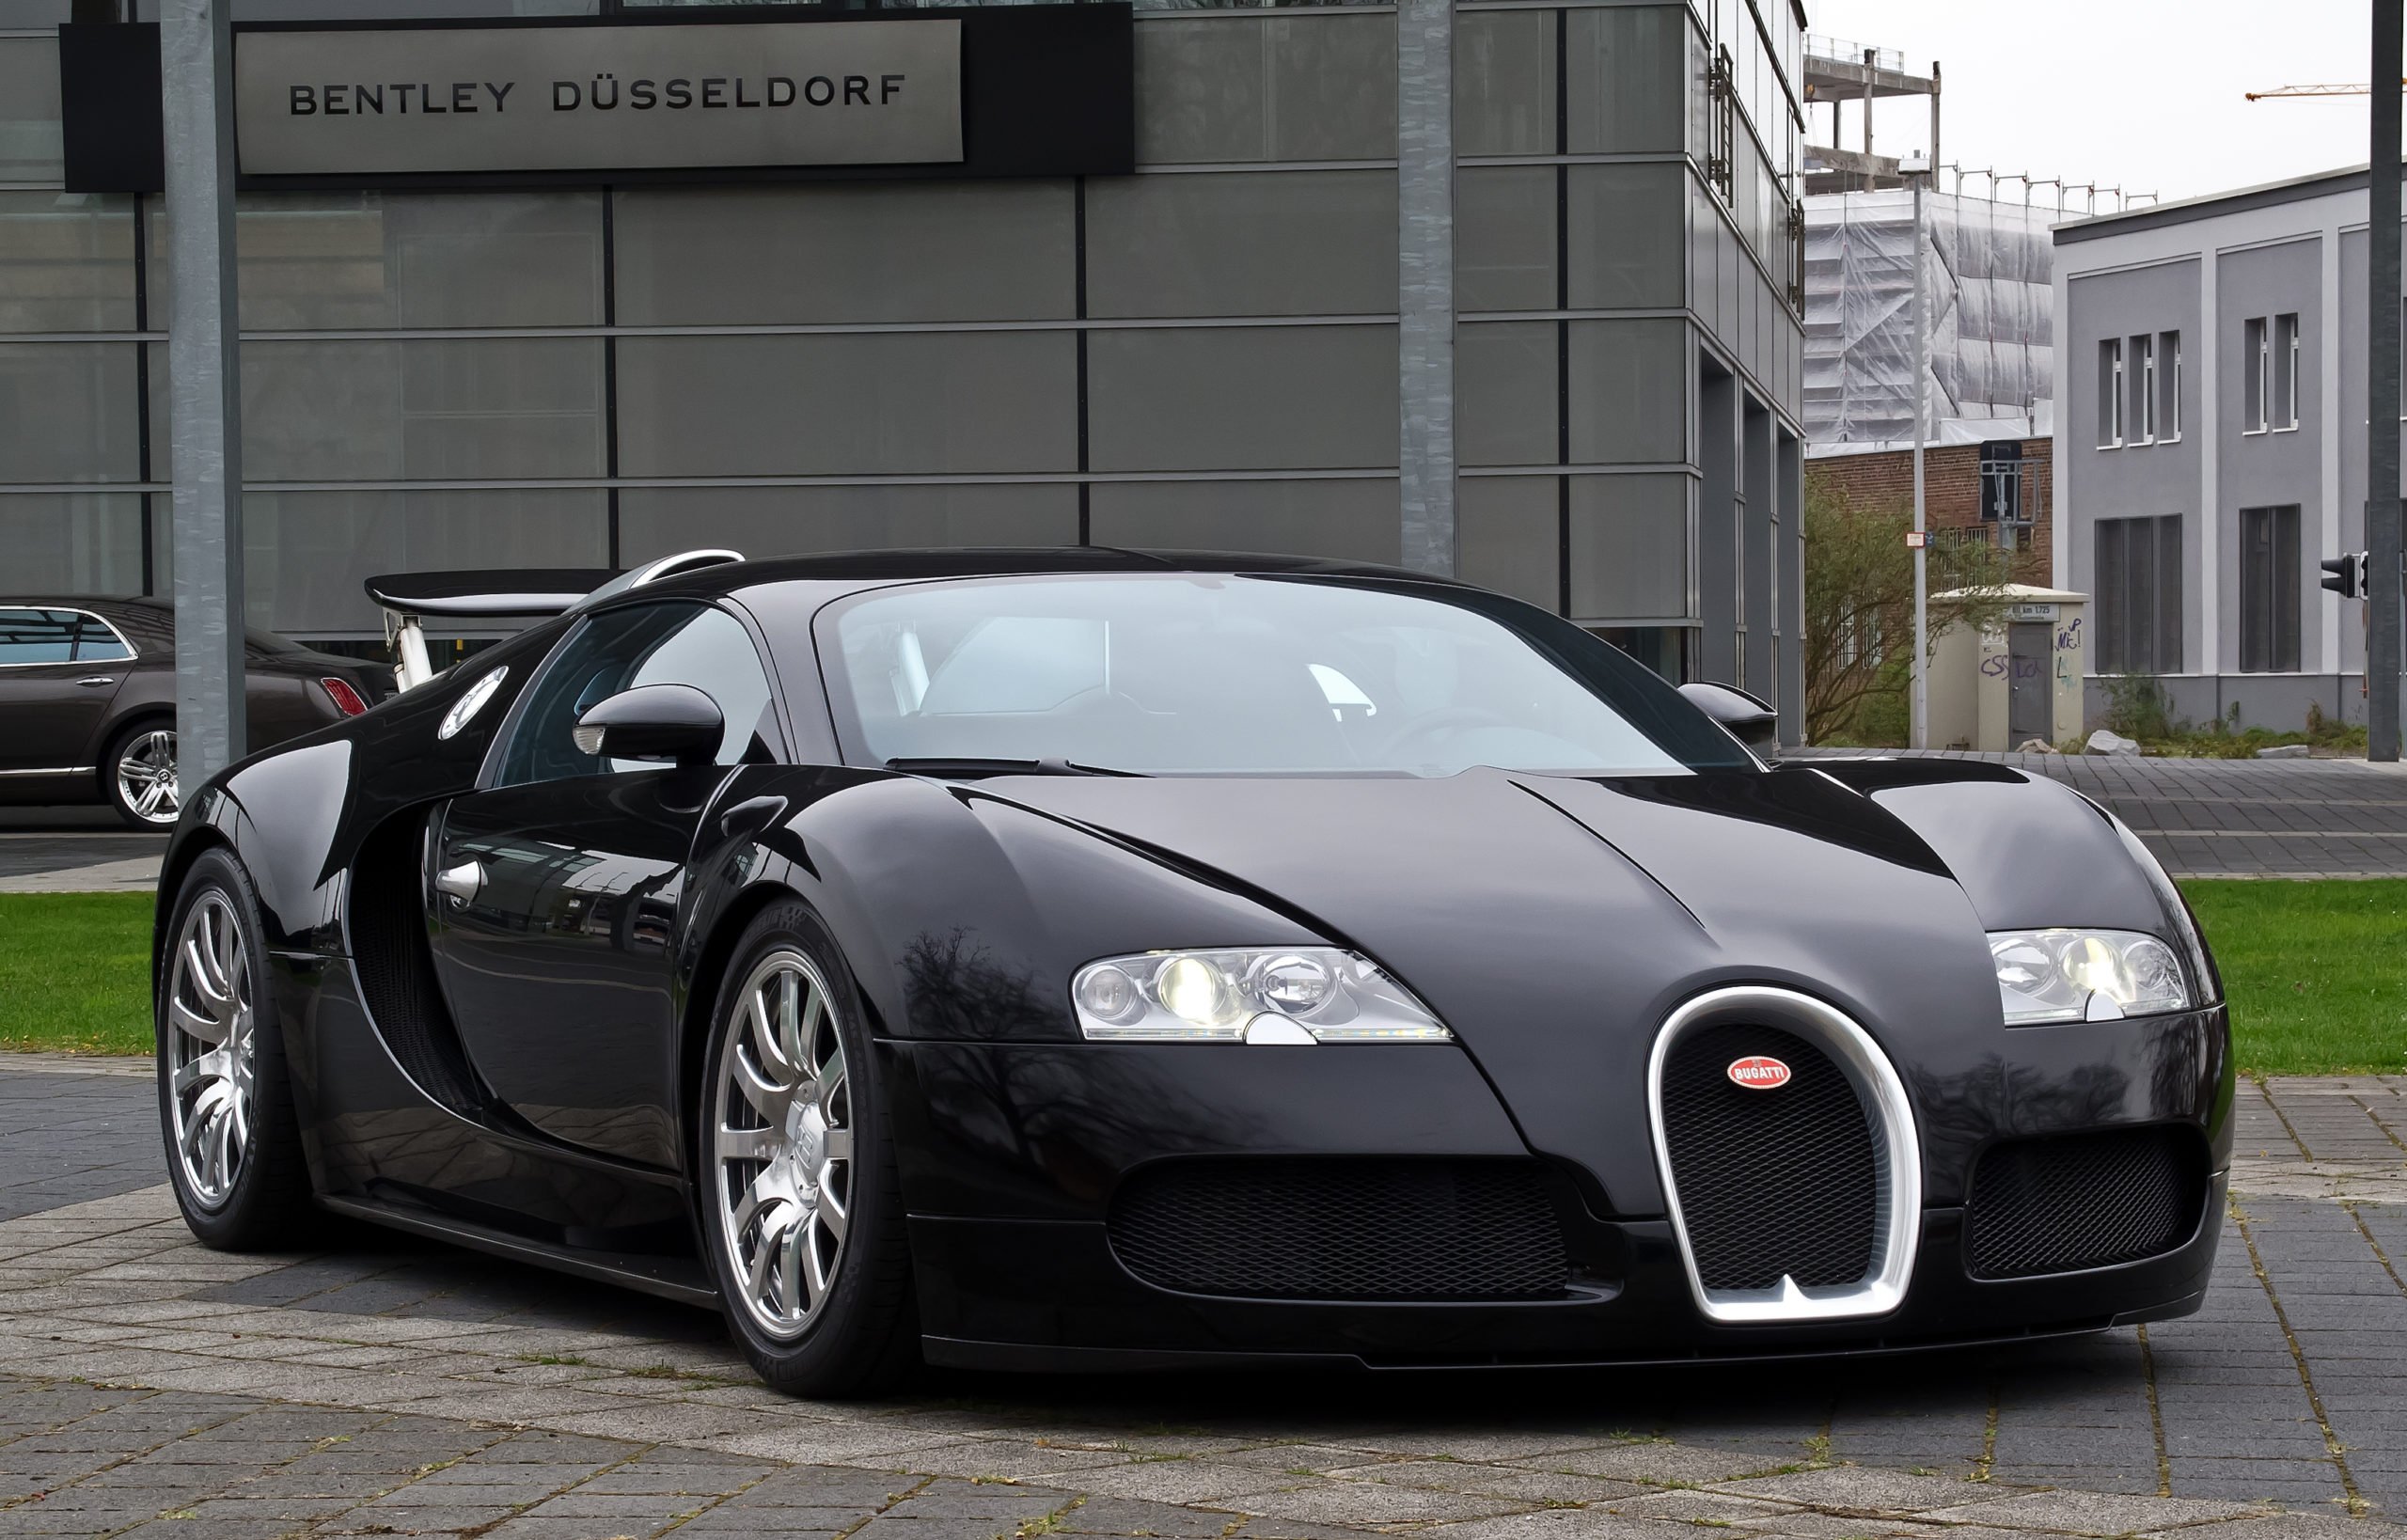 Bugatti Veyron one of the most Instagram able or Insta-worthy cars among on social media